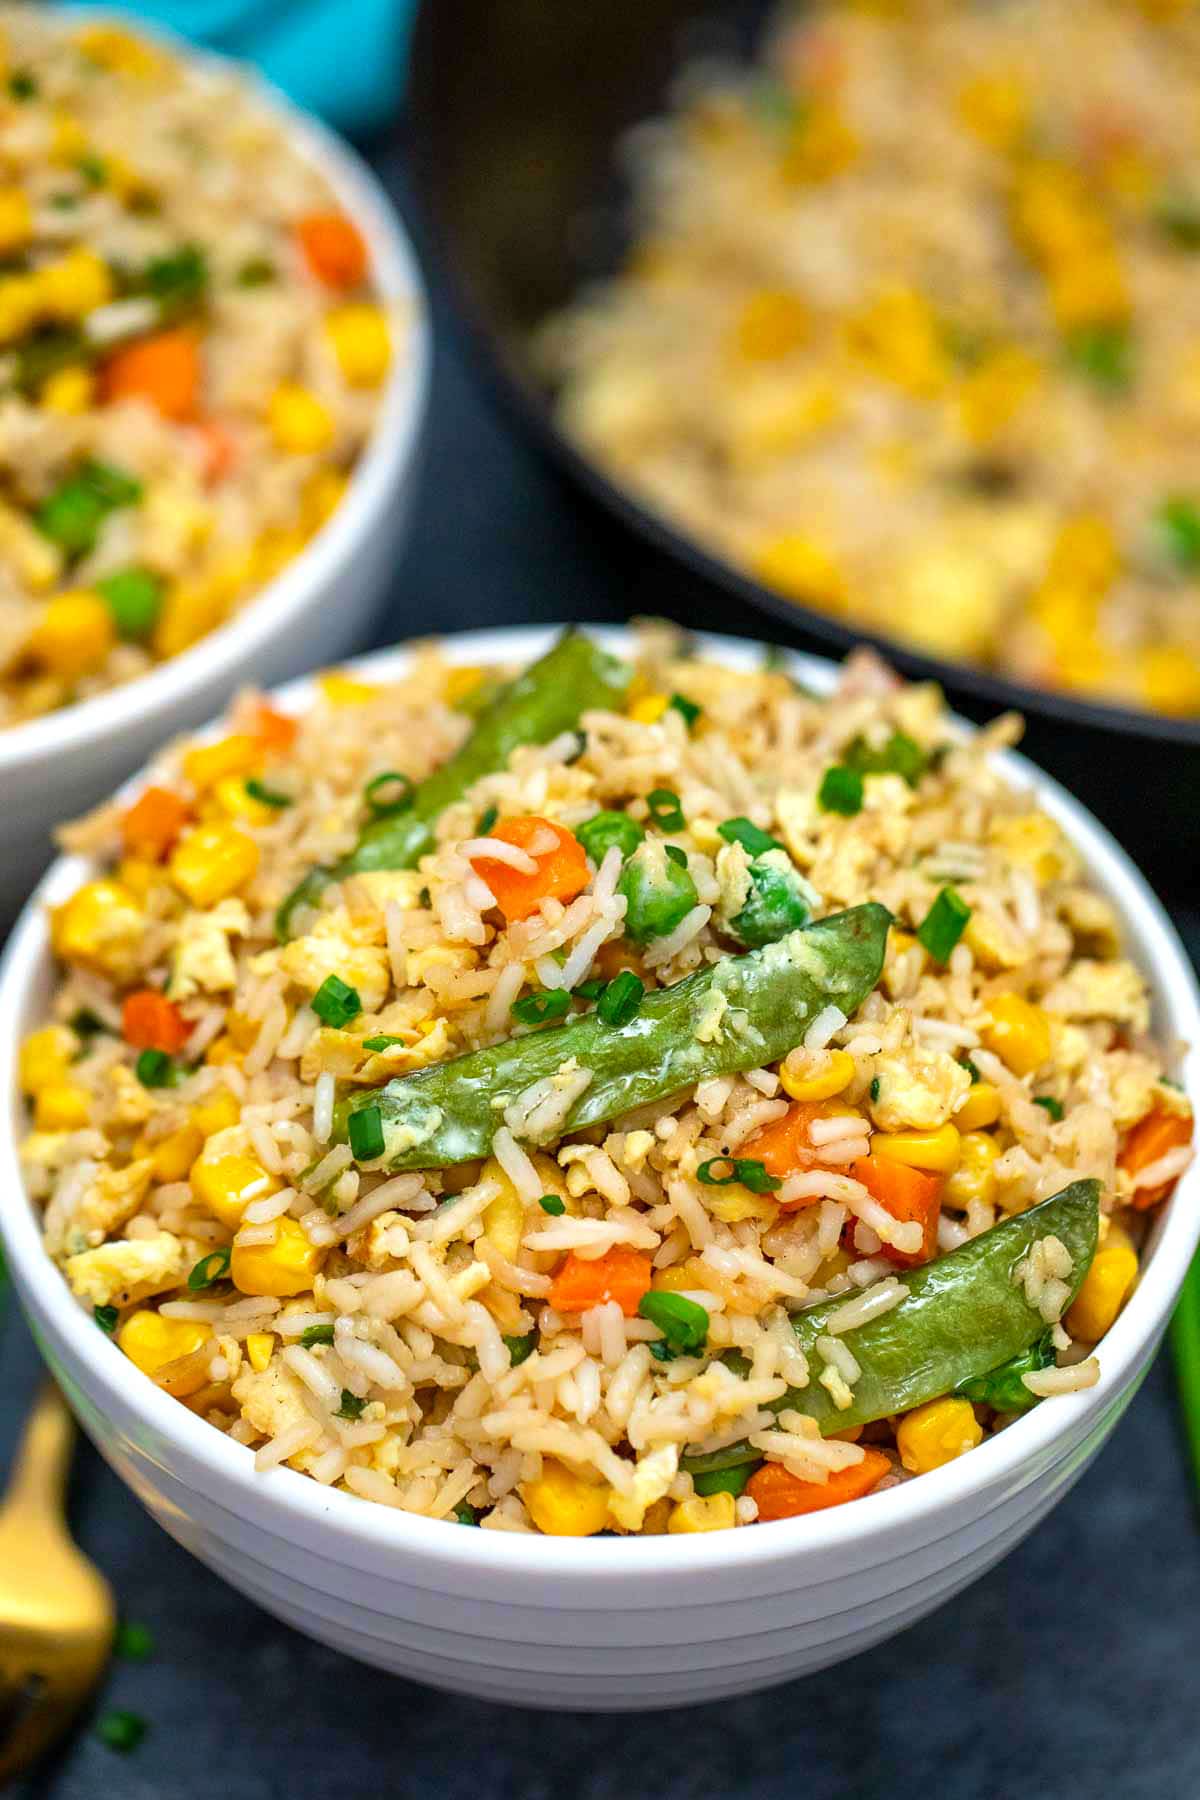 10-min Rainbow Fried Rice (easy one-pot rice cooker recipe